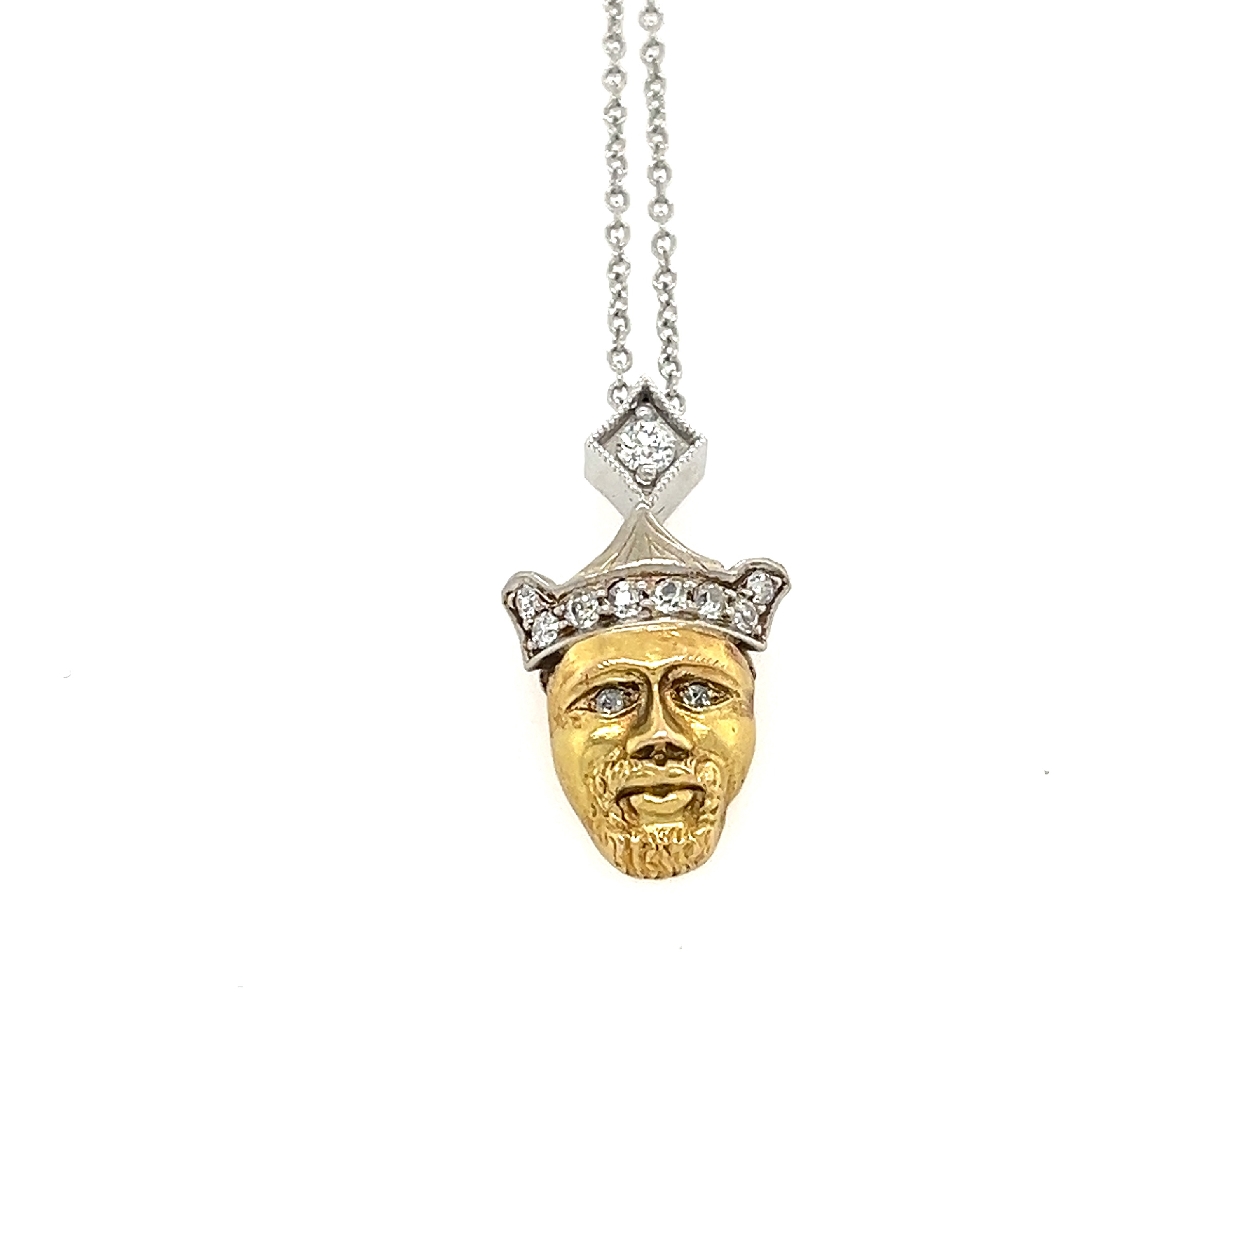 14K Yellow Gold Early 20th Century Kings Head Slide Pendant with Diamond Accents on a 16 inch Platinum Chain